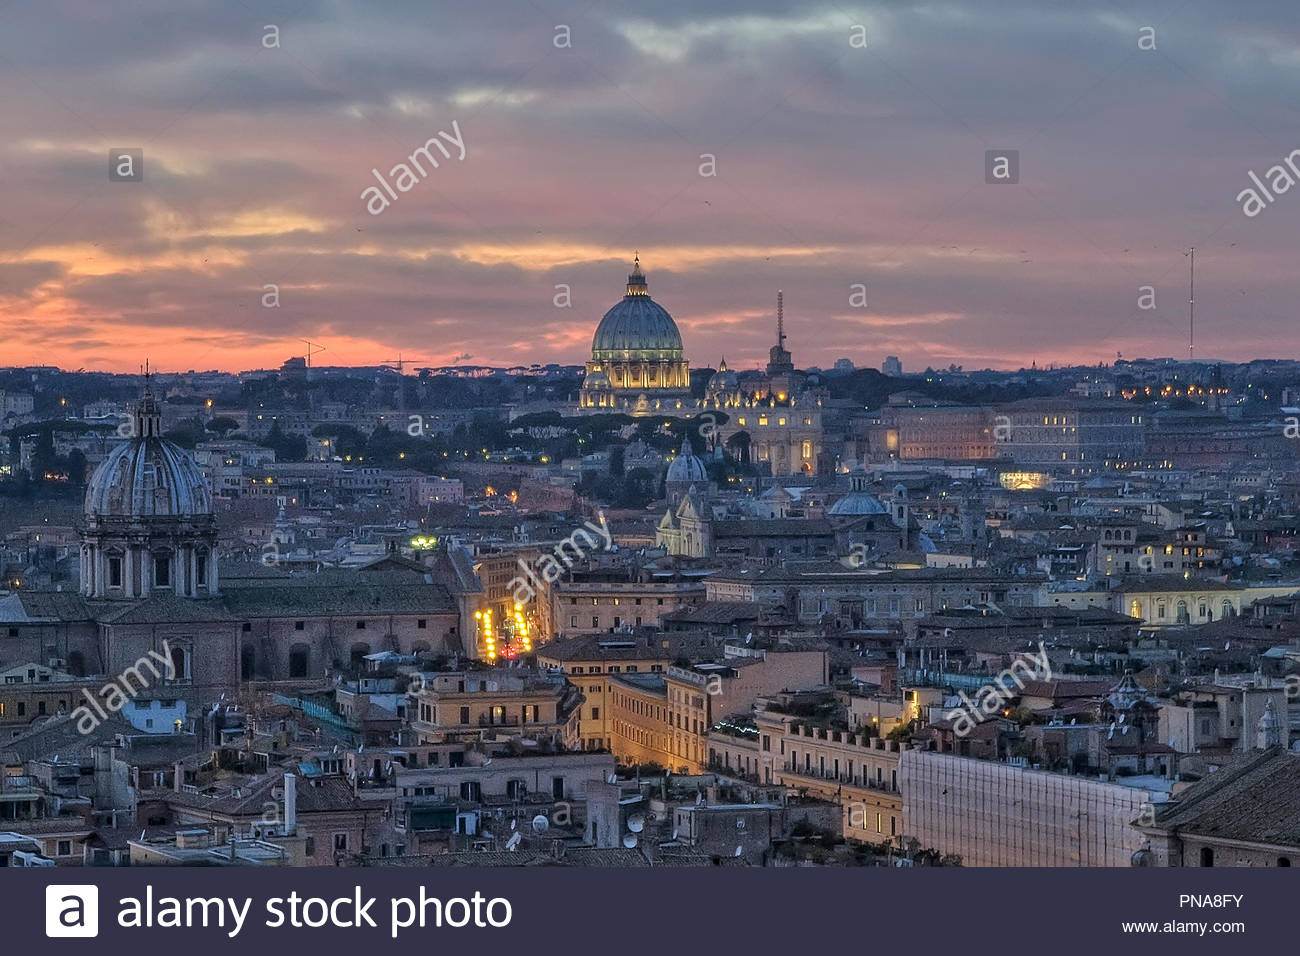 Panoramic Of Rome At Dusck With The St Peter S Dome In